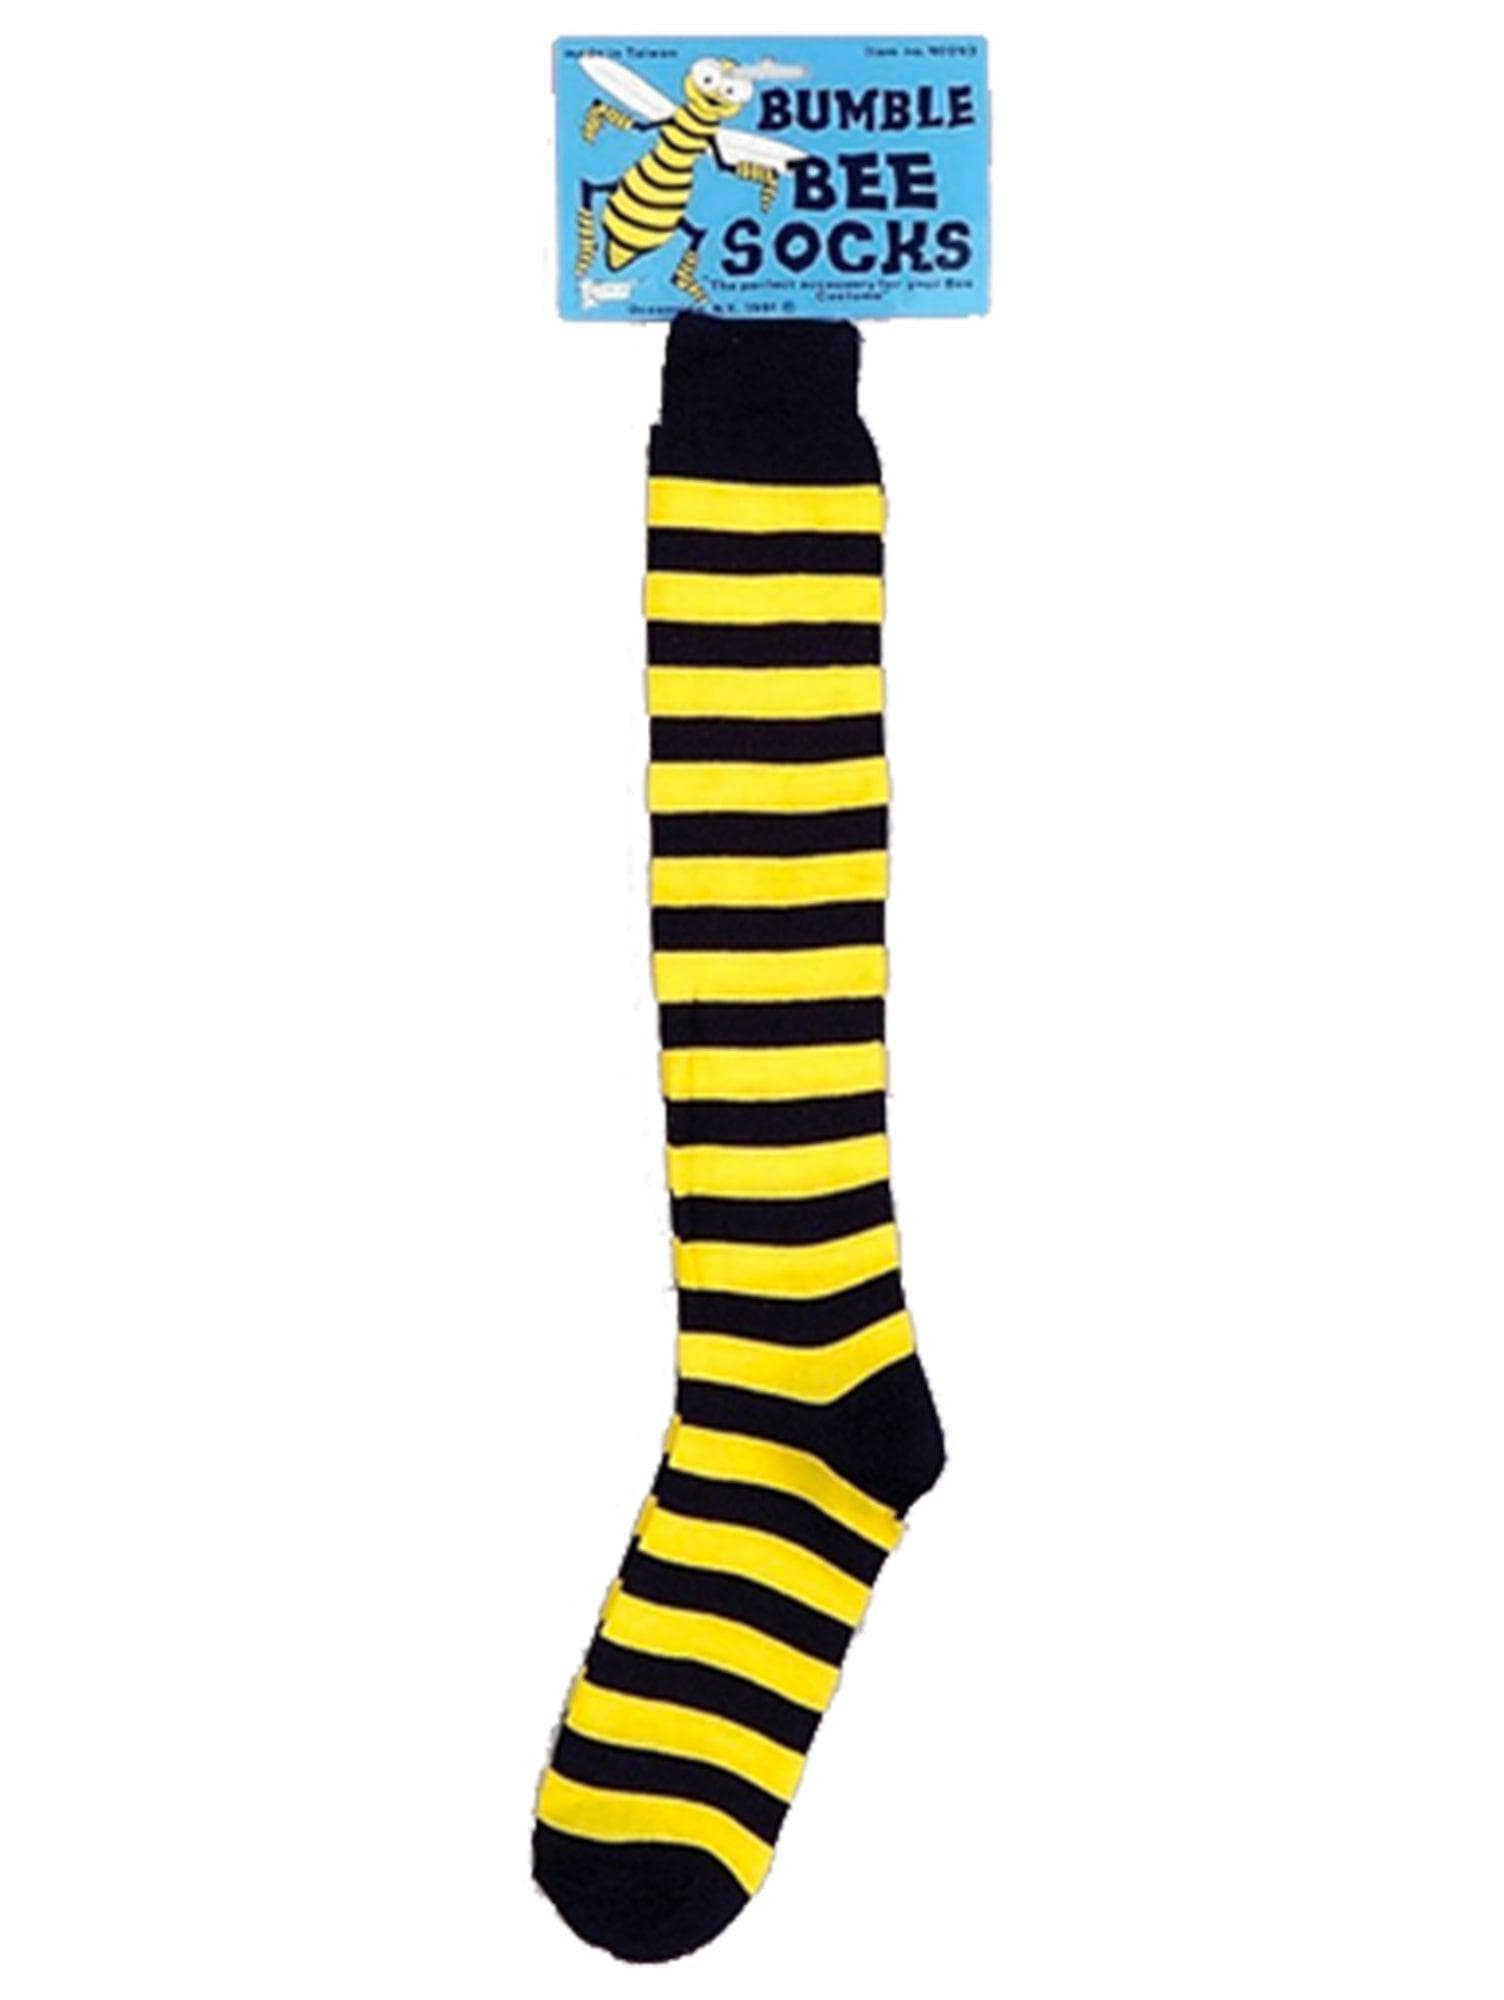 Adult Black and Yellow Striped Bumble Bee Socks - costumes.com